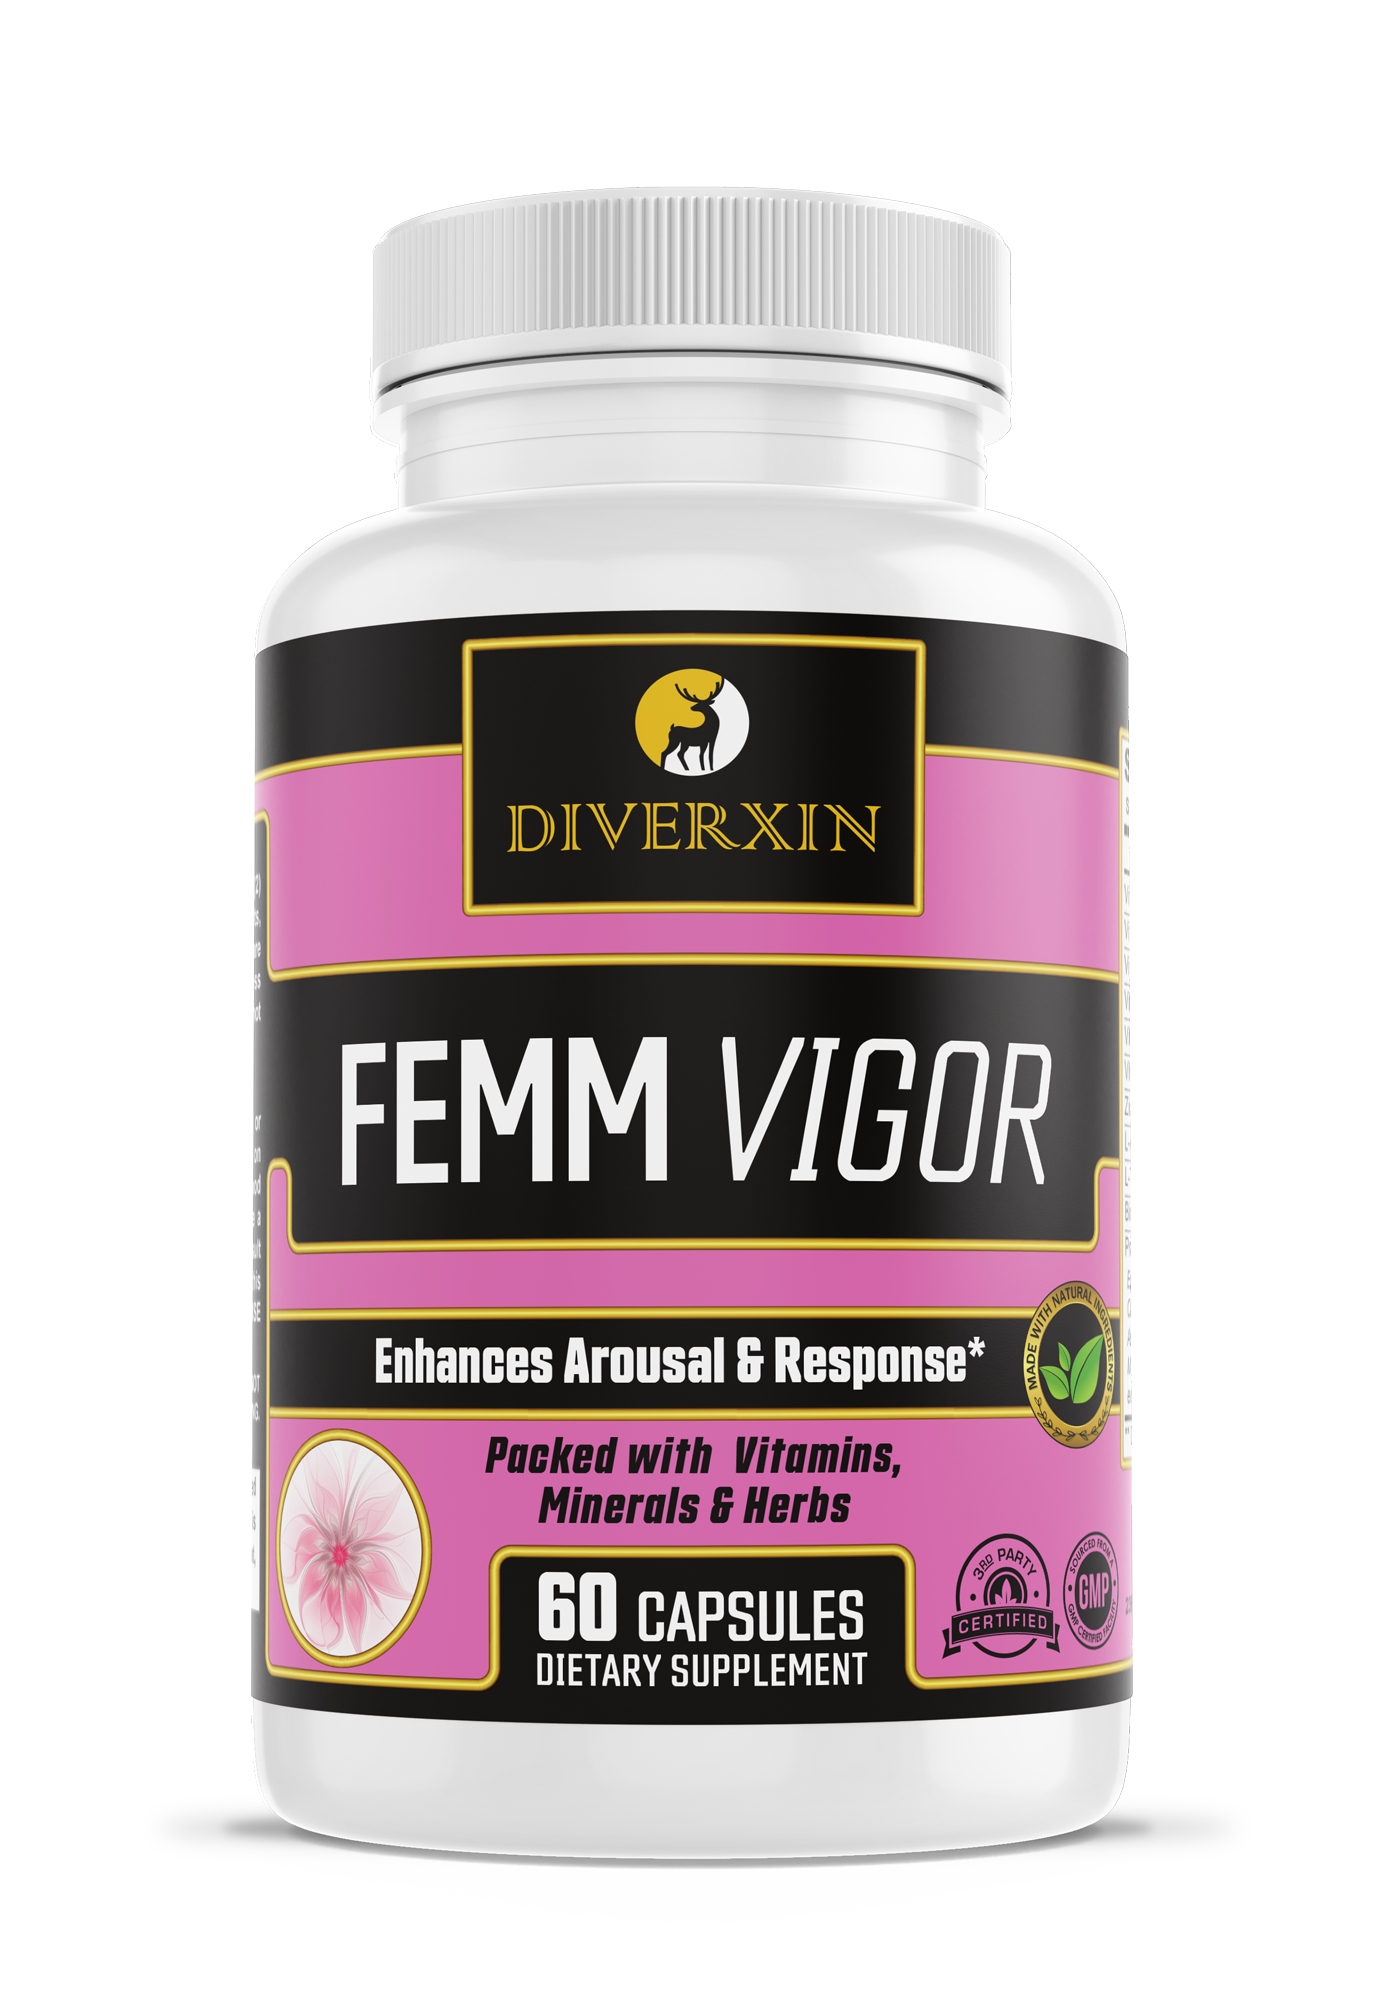 FEMM VIGOR - RED HOT Female Libido Booster Offer With UPSELL! thumbnail